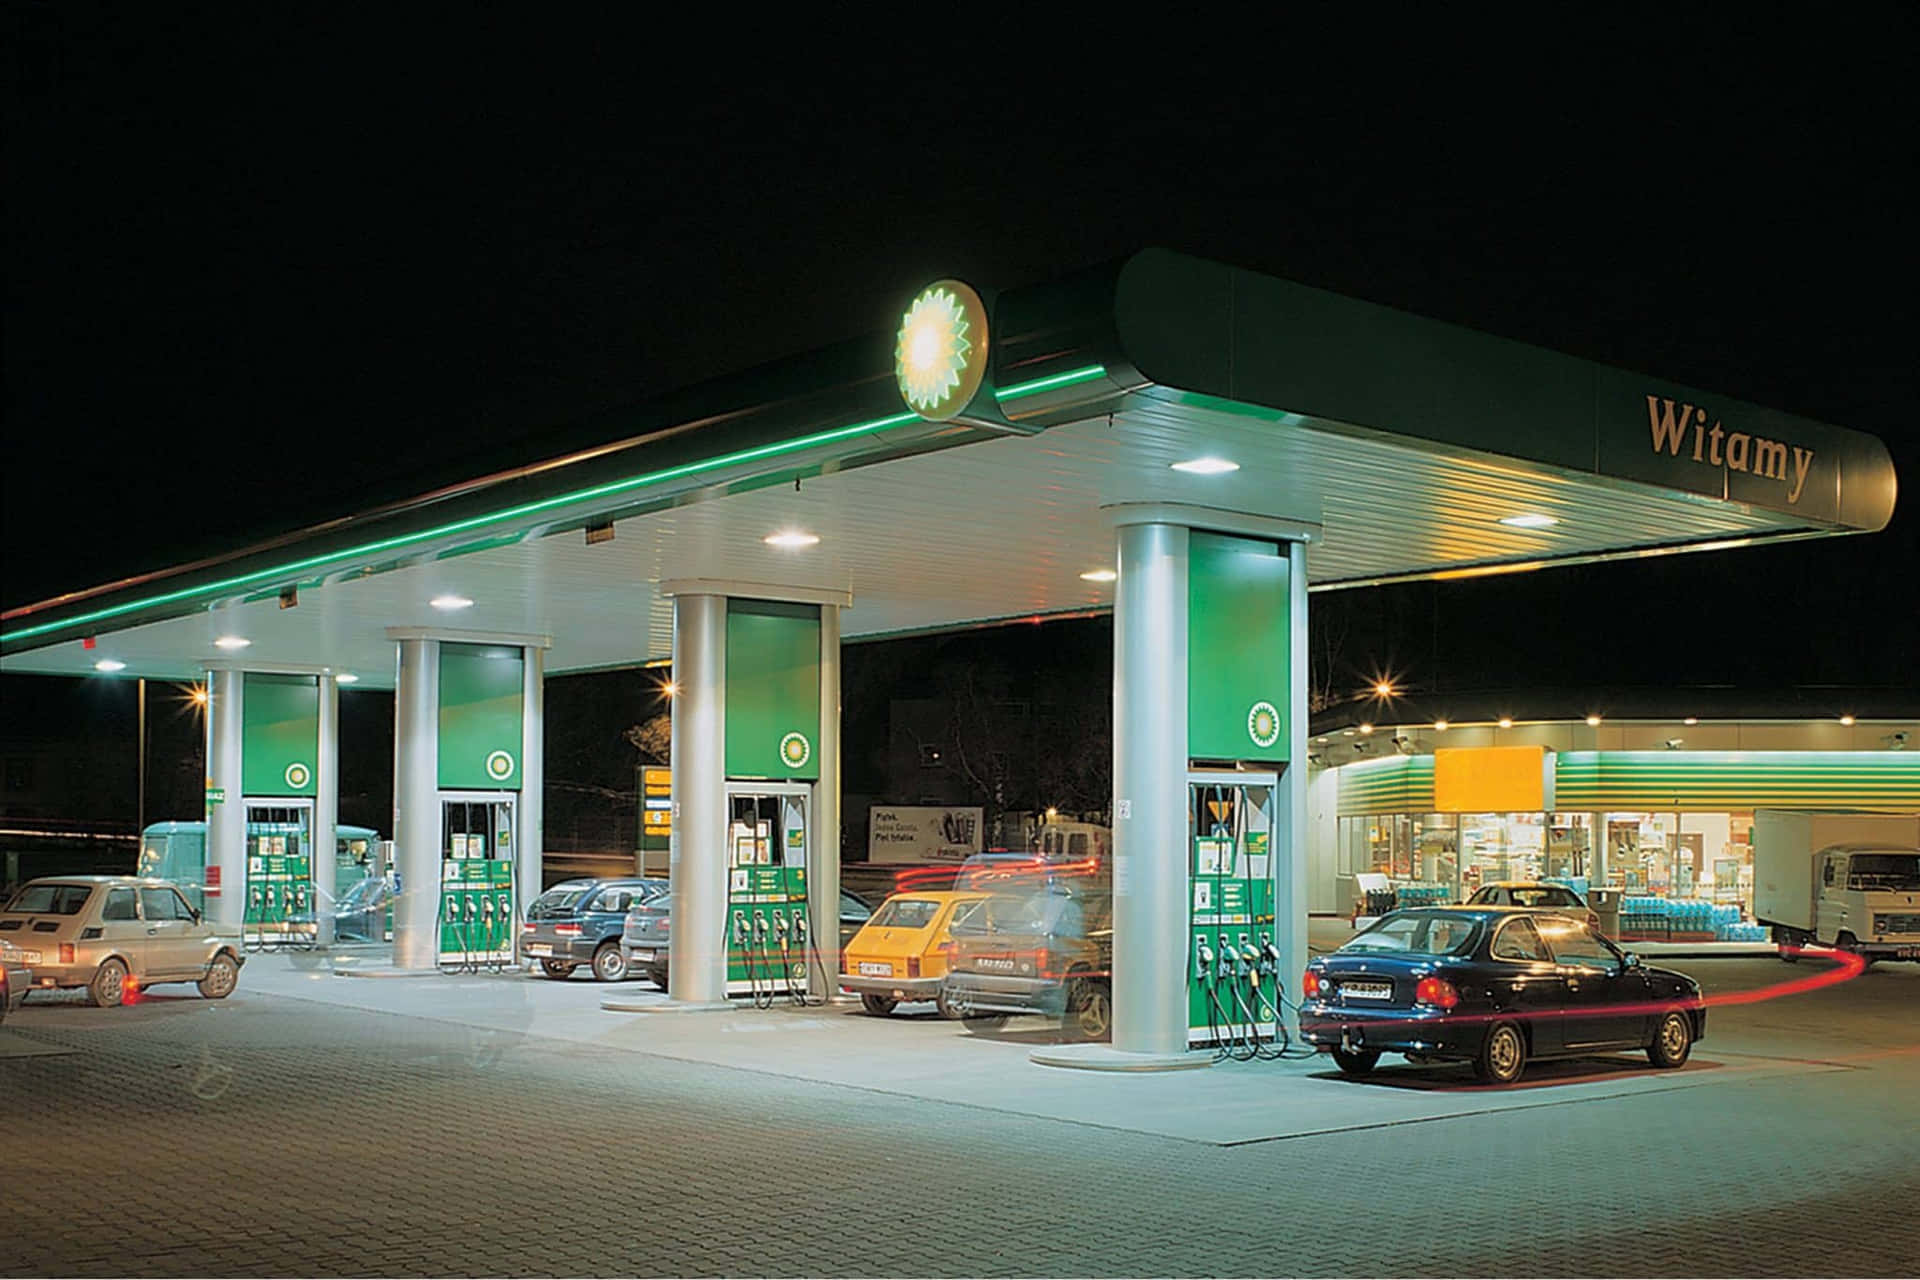 Image  Refilling your car at a Petrol Station